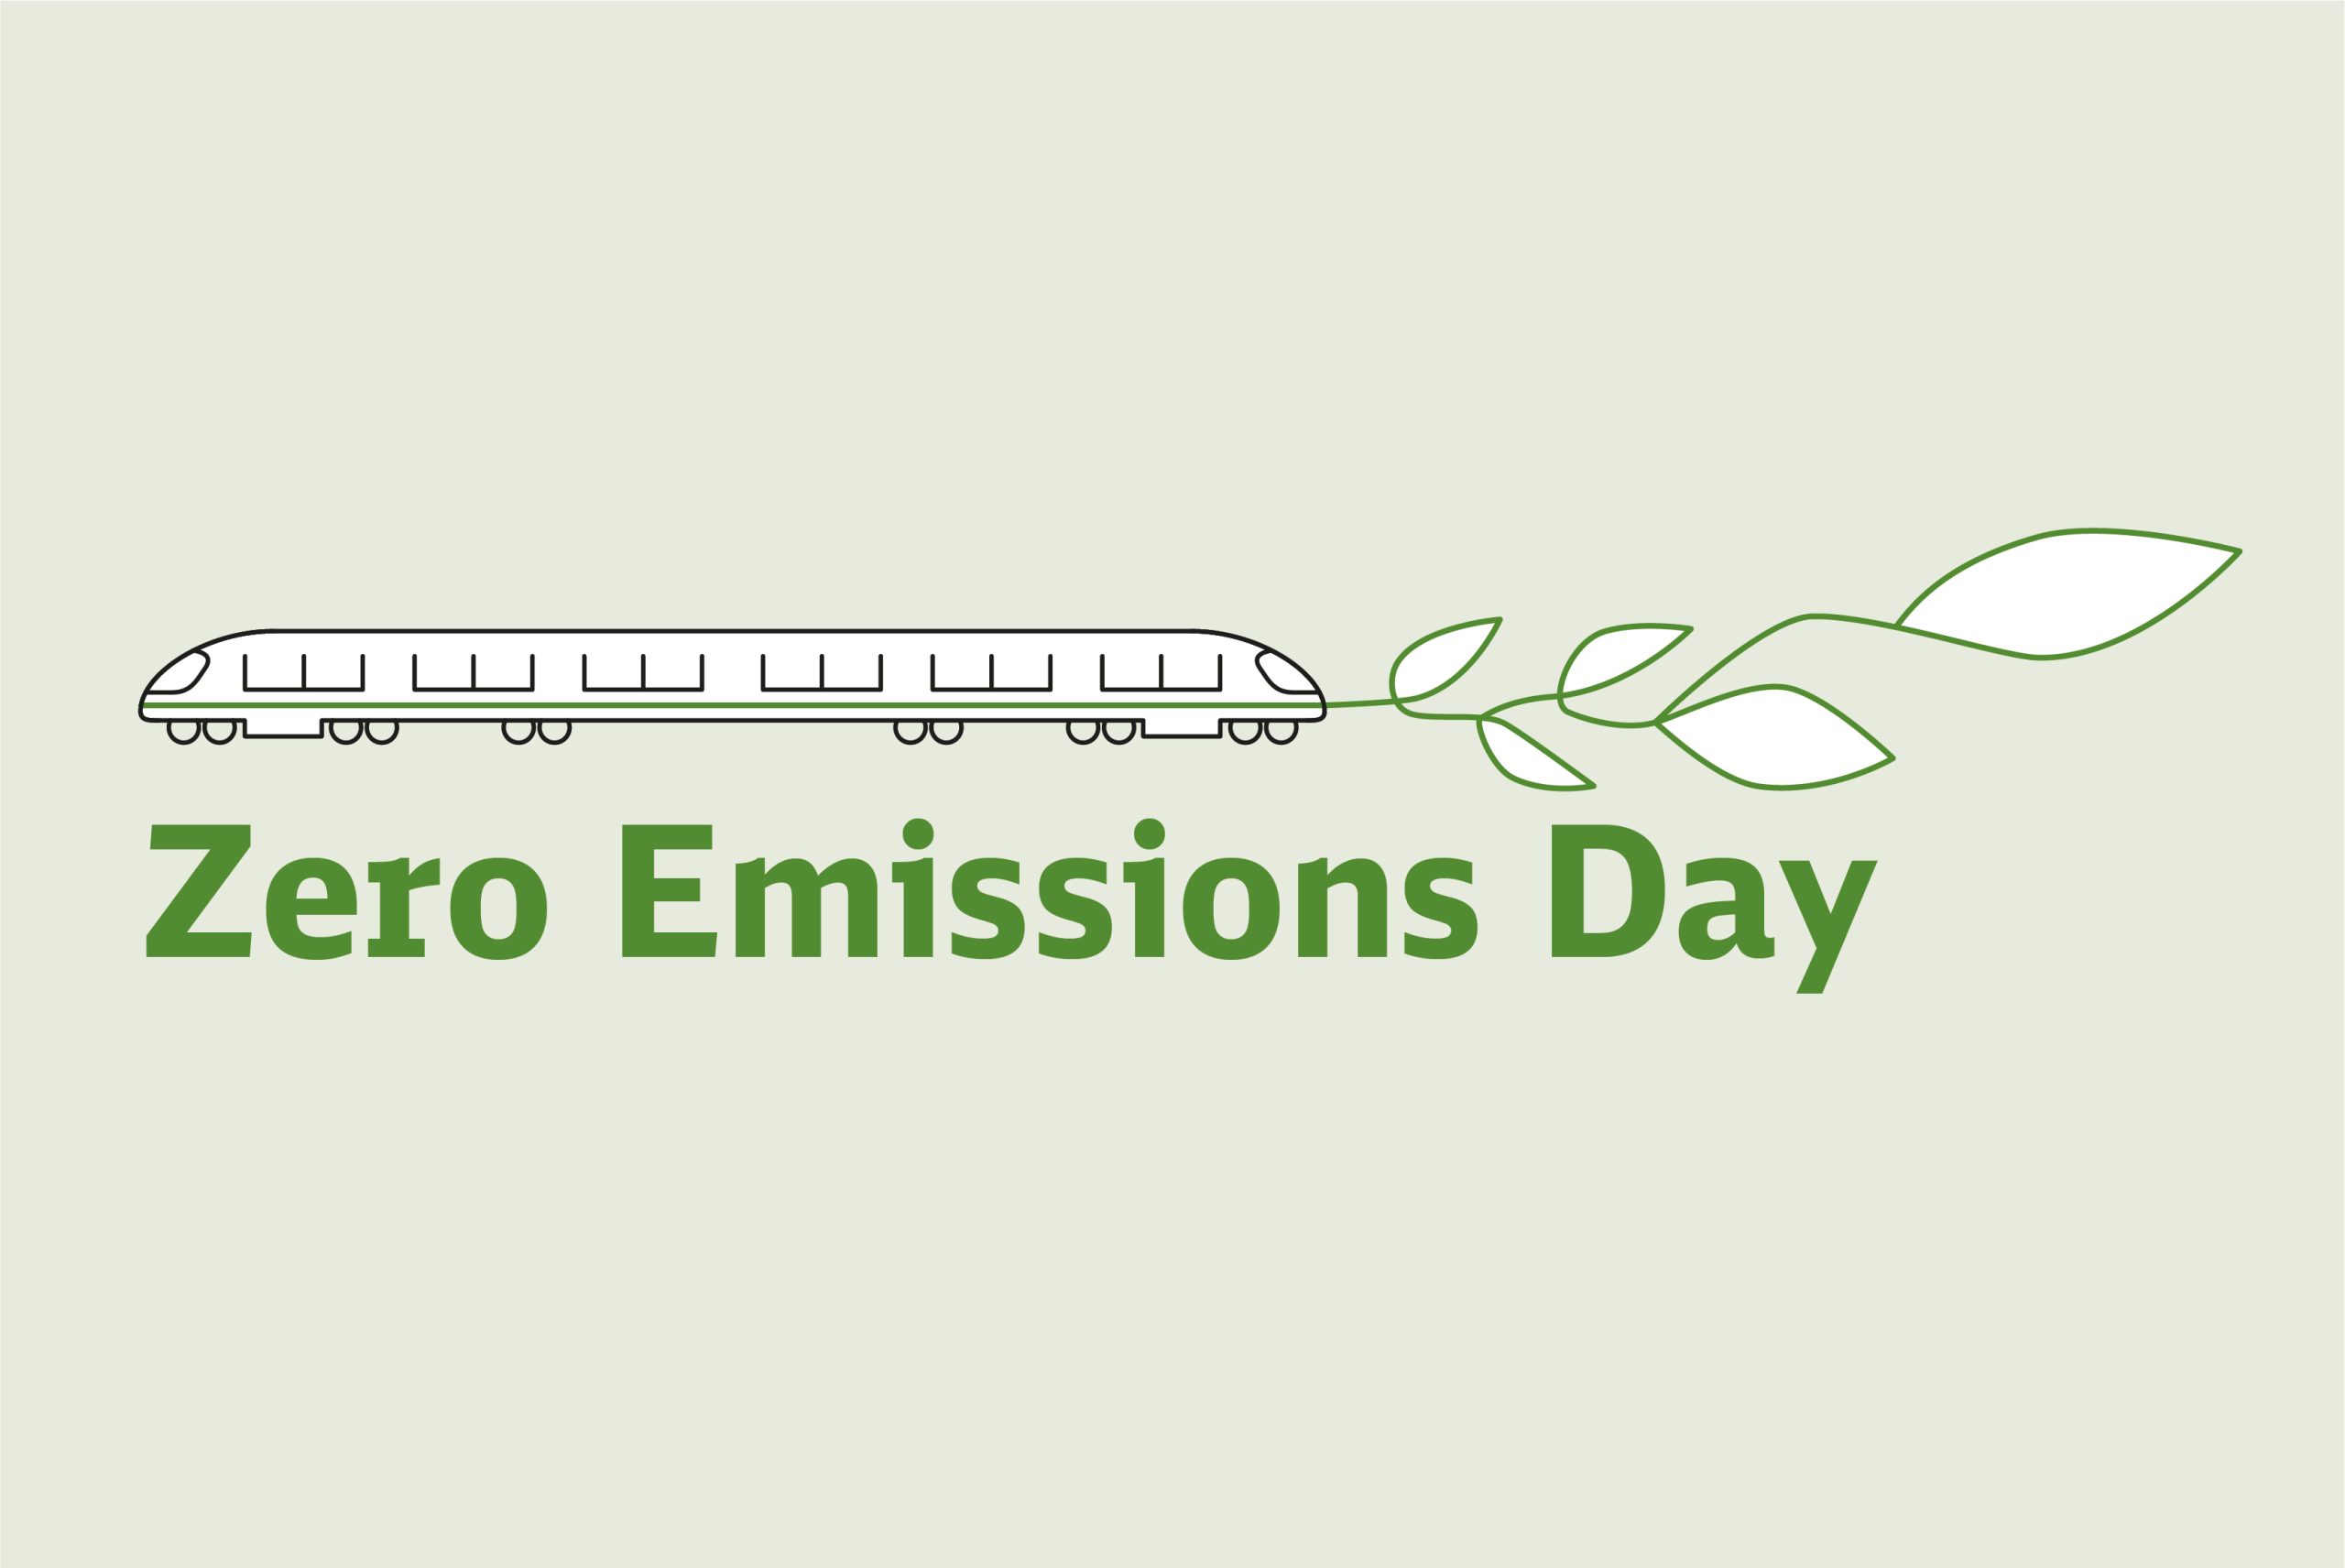 Zero emissions day logo - green train mit leaves on a green background